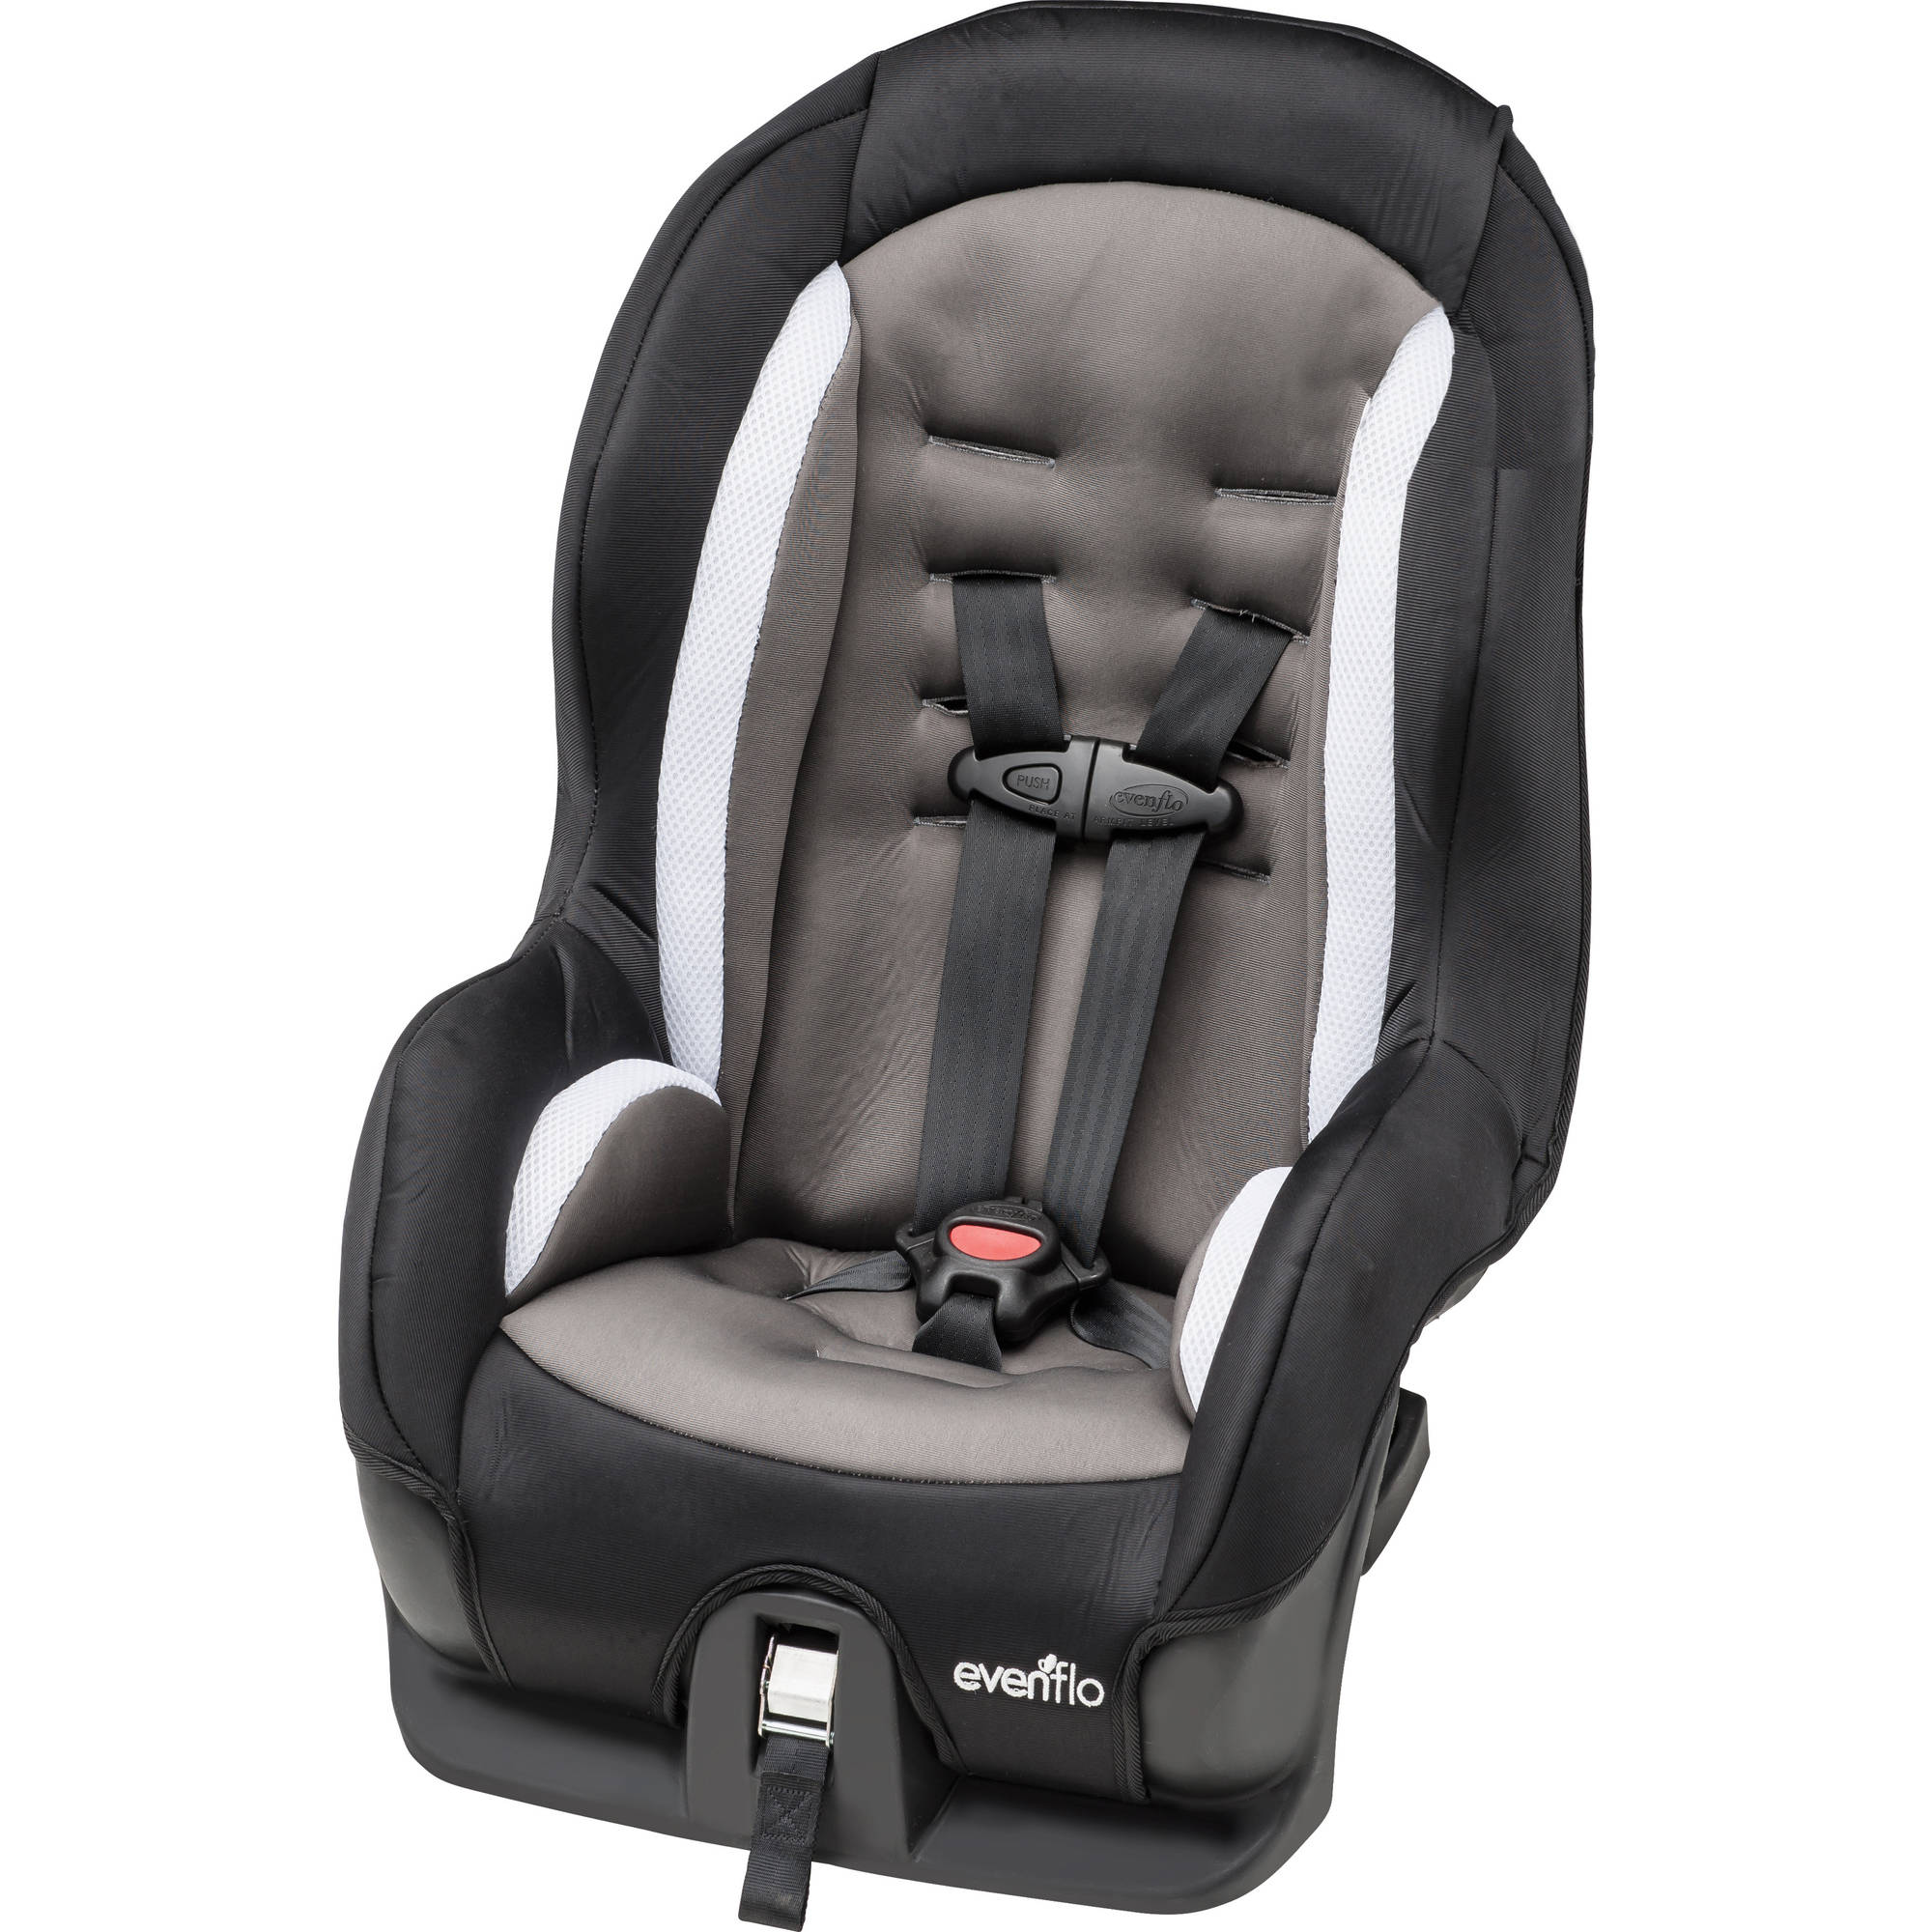 Evenflo Tribute Sport Convertible Car Seat, Maxwell - image 1 of 6